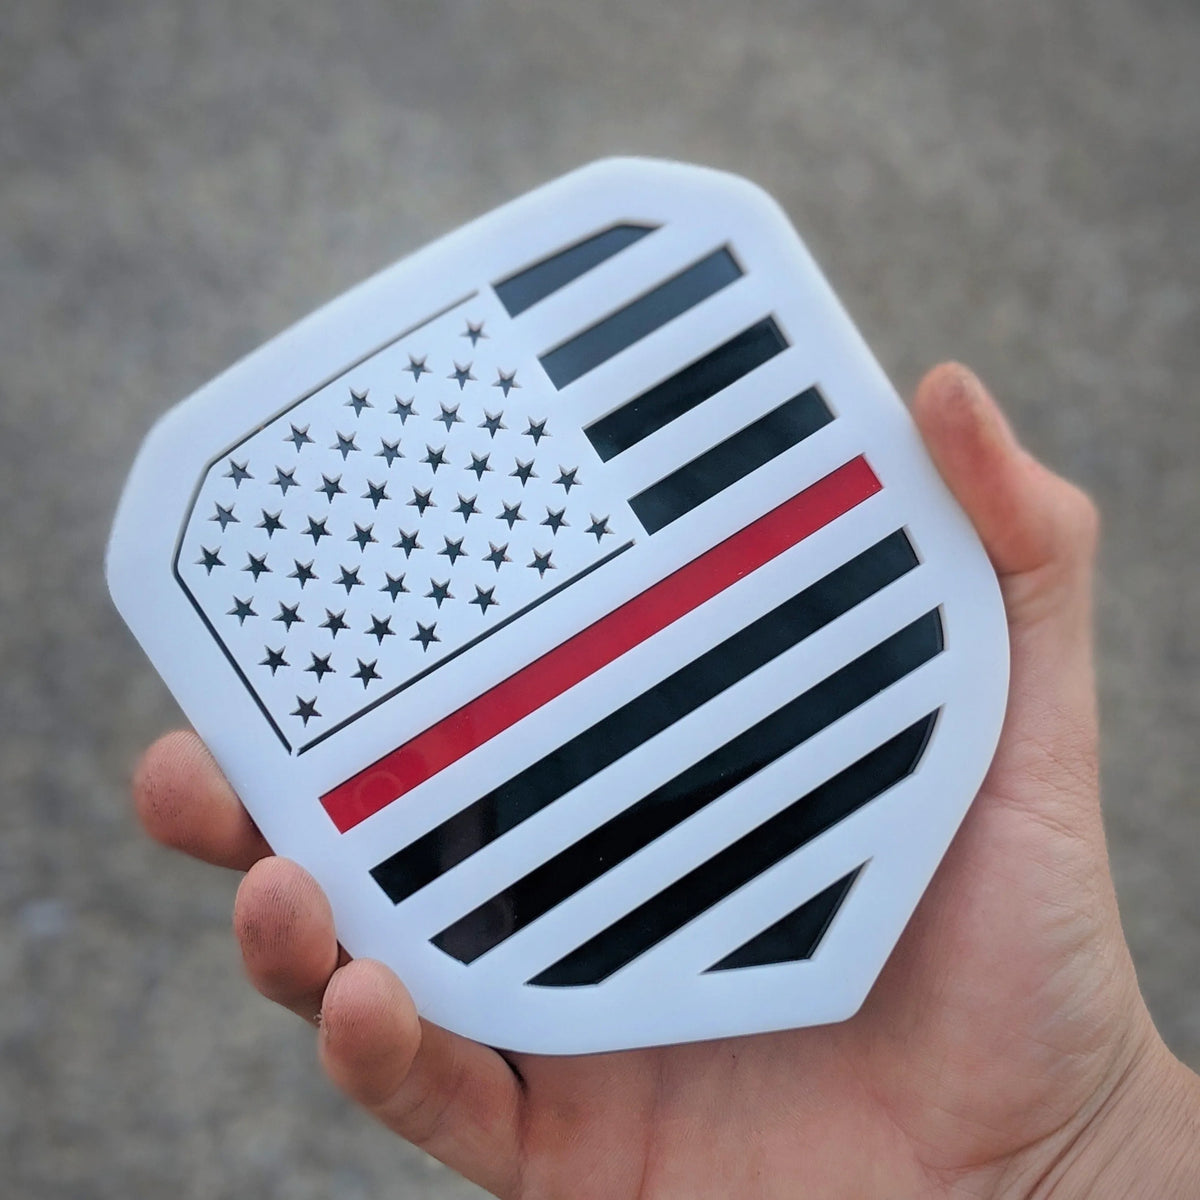 American Flag Badge - Fits 2013-2018 Dodge® Ram® Grille - 1500, 2500, 3500 - White on Black with a Thin Red Line